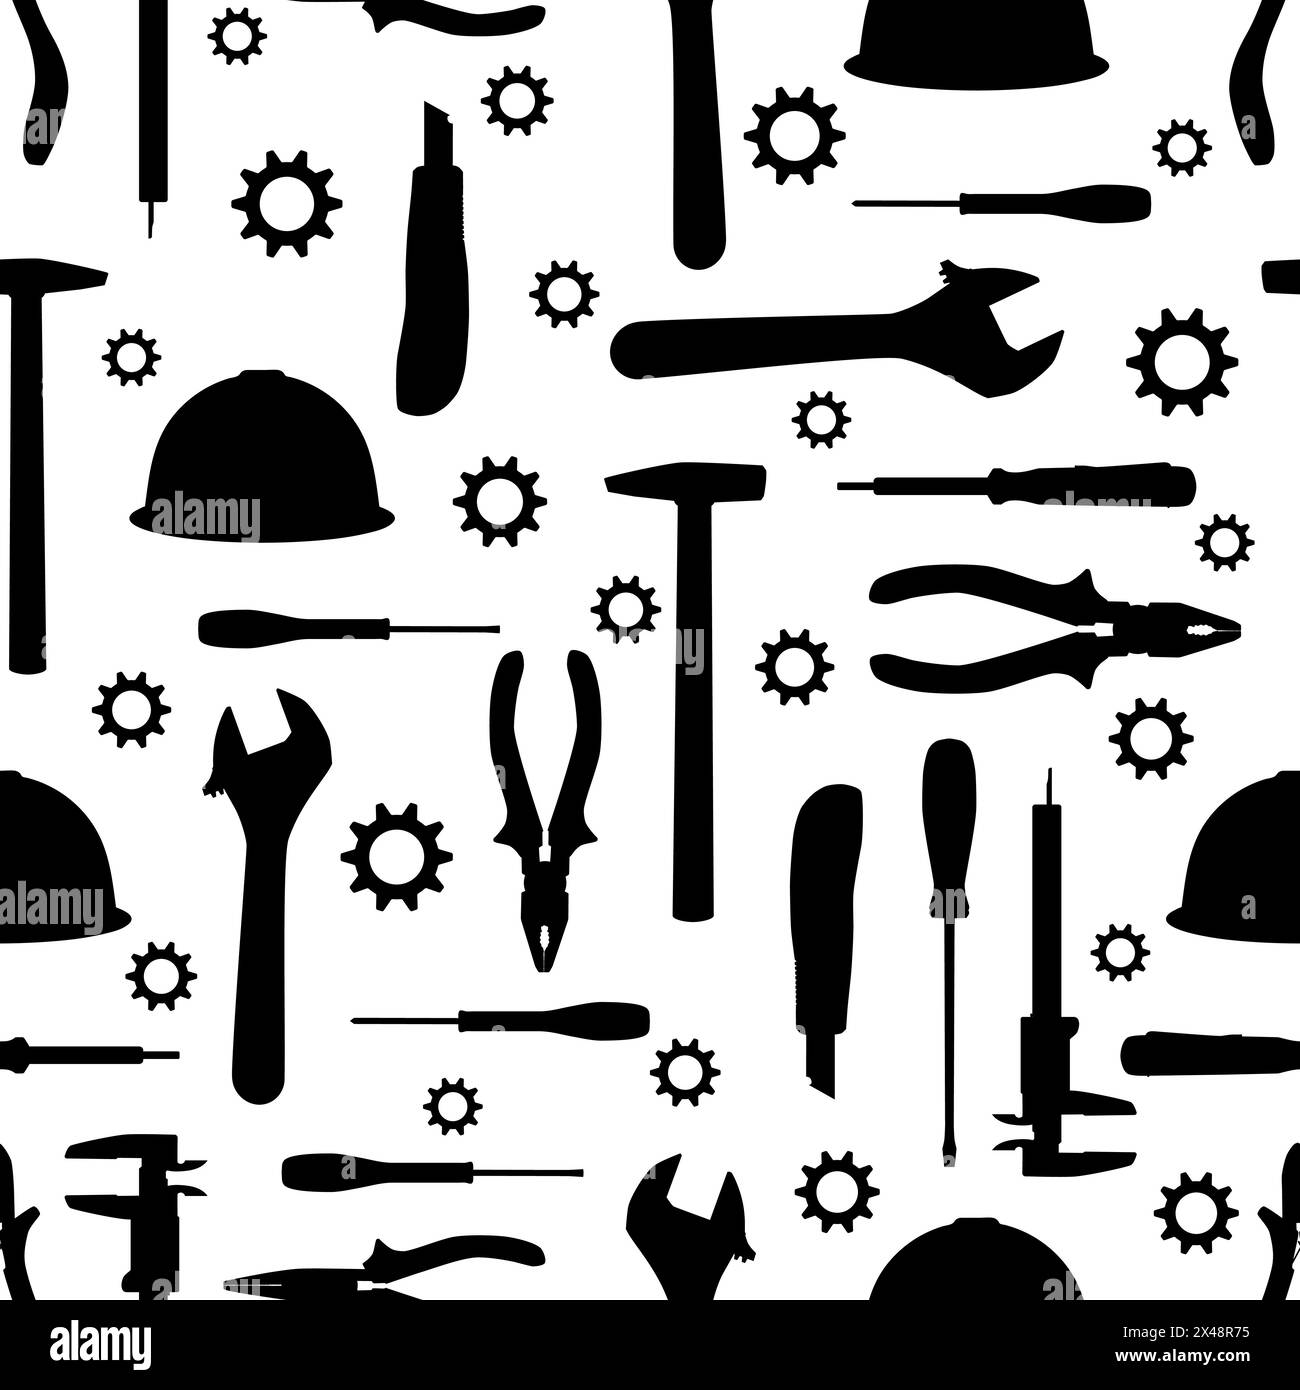 Work tools vector seamless pattern. Electrician, construction worker, repairman hand tools silhouettes wallpaper, background. Stock Vector